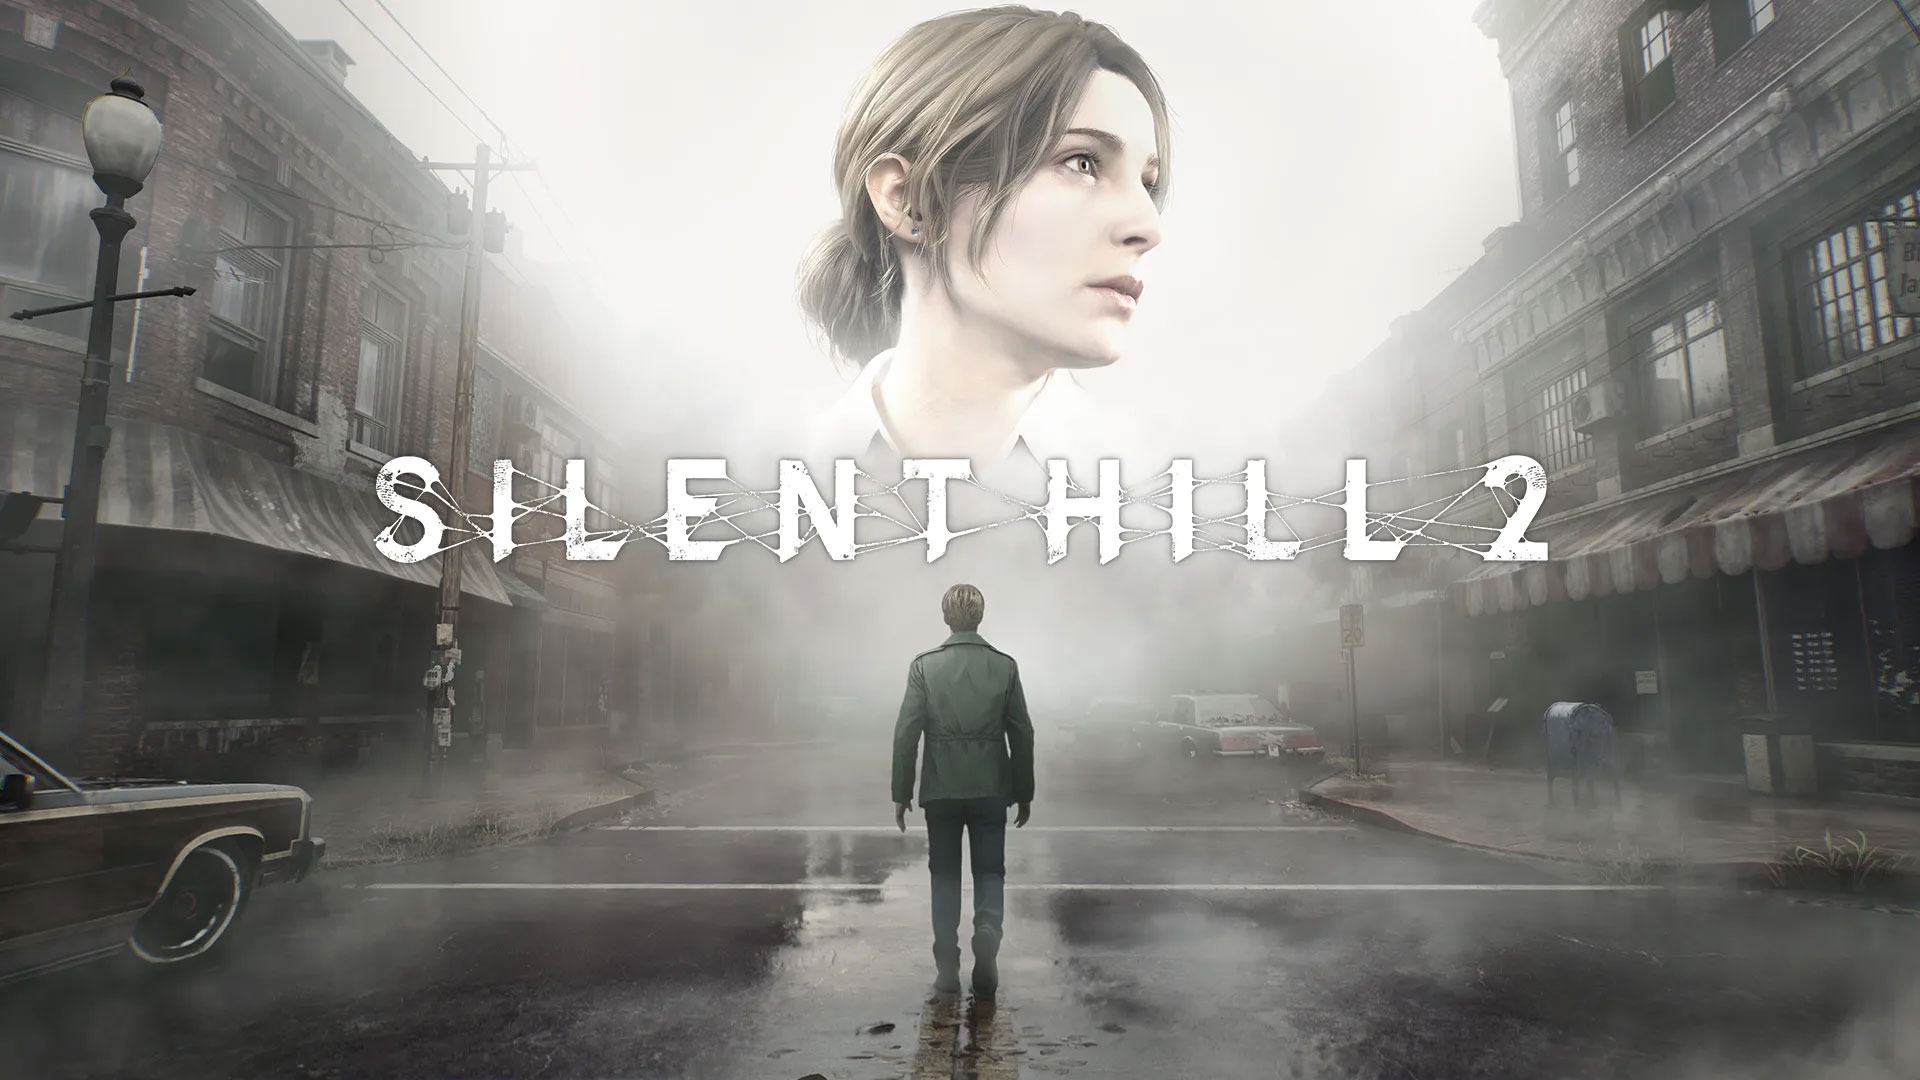 The Silent Hill 2 remake launches October 8